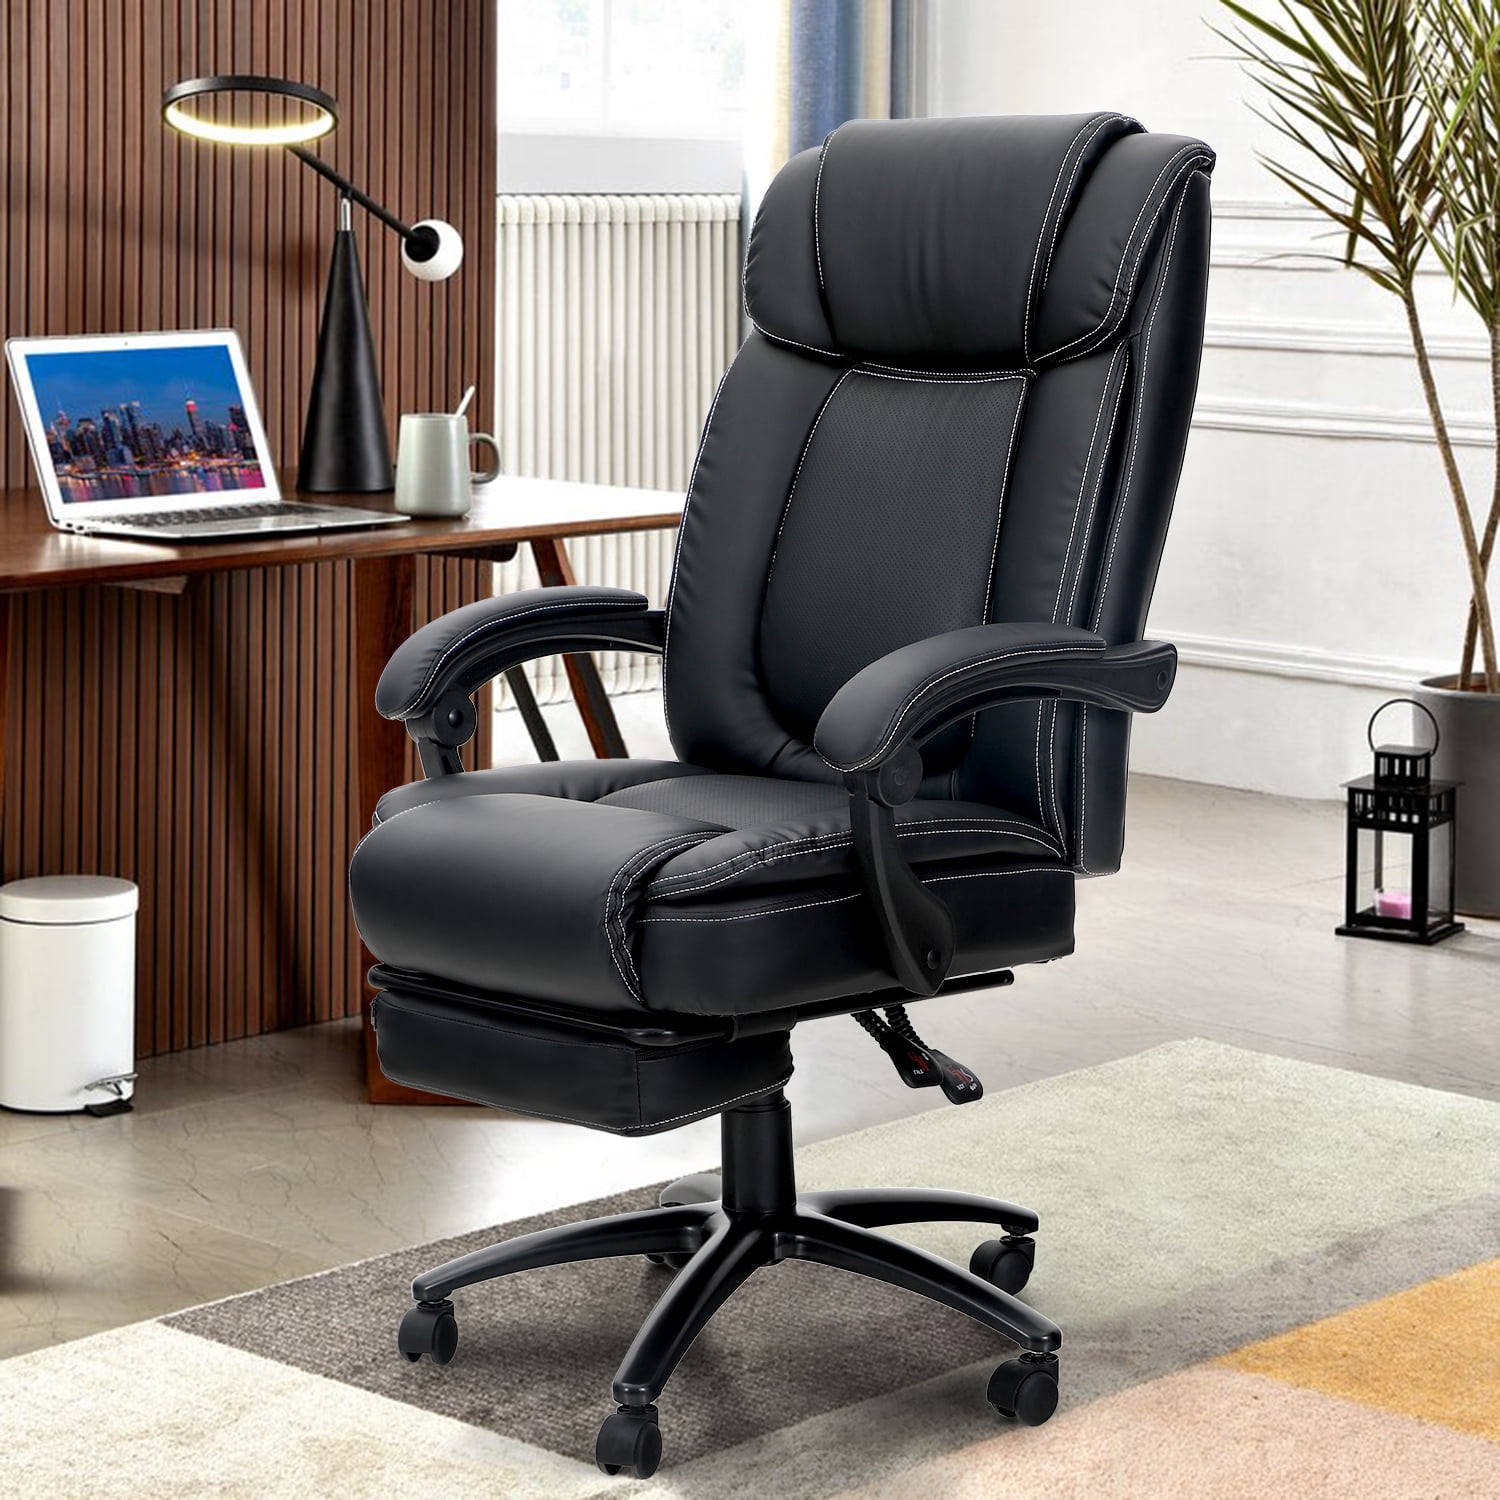 High quality Office Chairs For Ergonomic Support